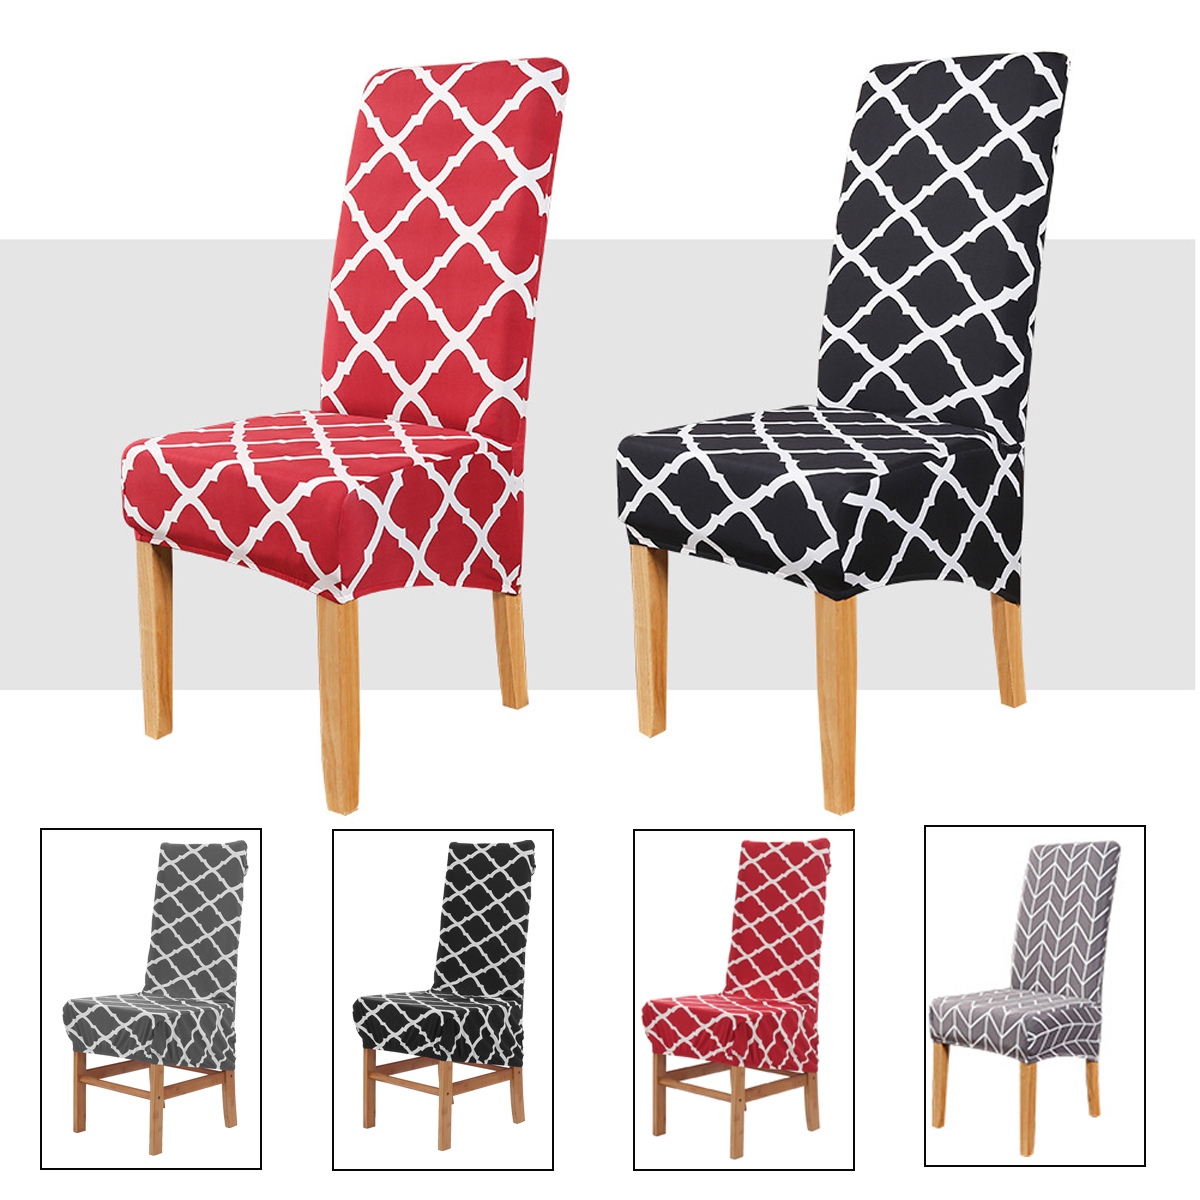 Printed-Stretch-Chair-Cover-Elastic-Seat-Chair-Covers-Office-Chair-for-Slipcovers-Restaurant-Banquet-1765523-1